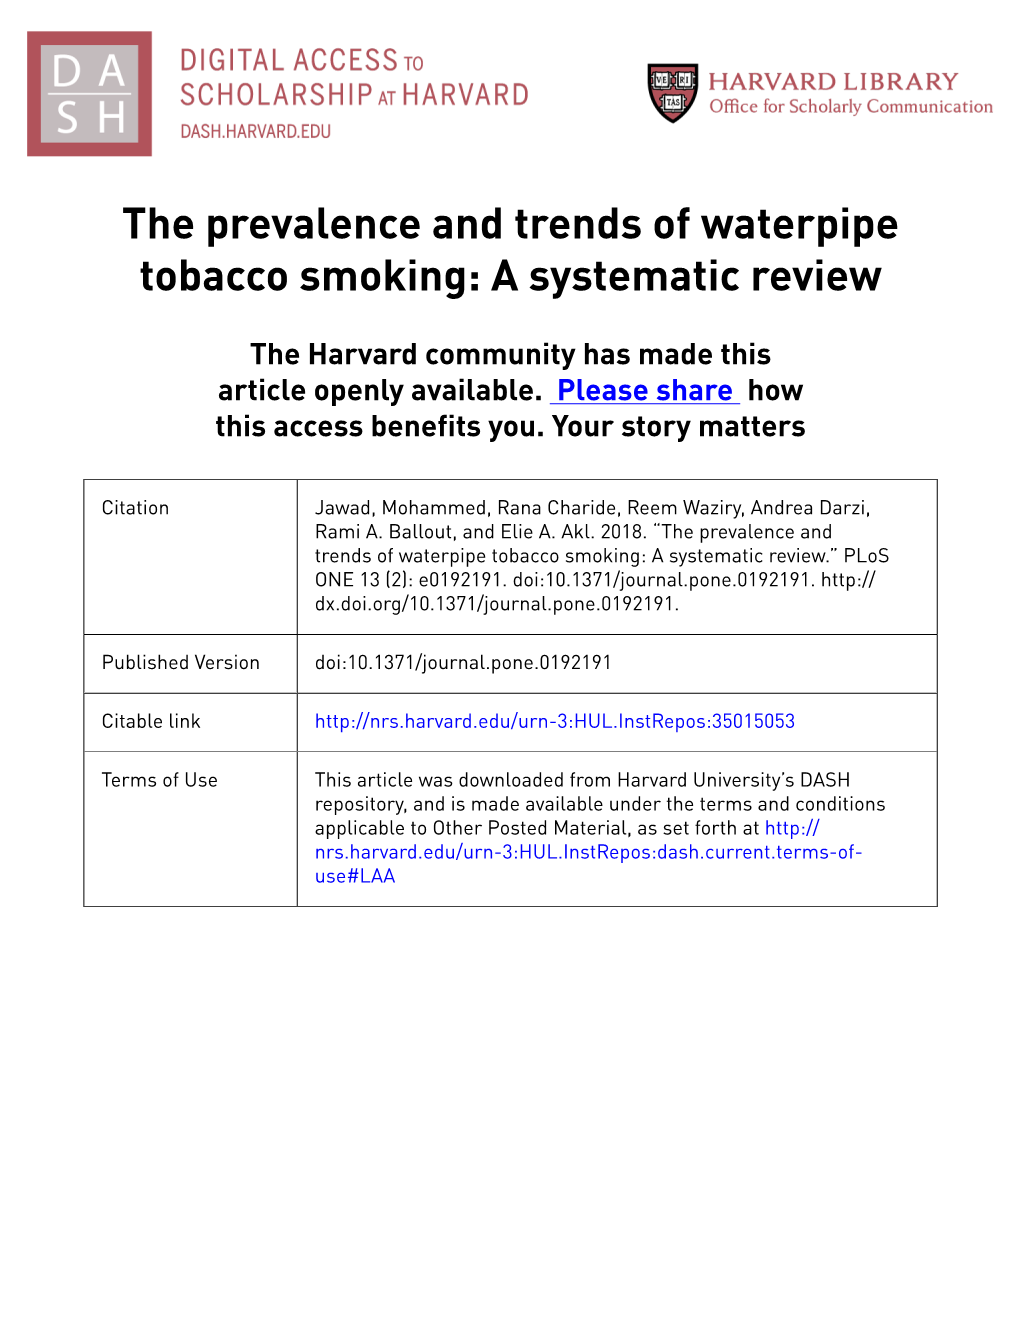 The Prevalence and Trends of Waterpipe Tobacco Smoking: a Systematic Review